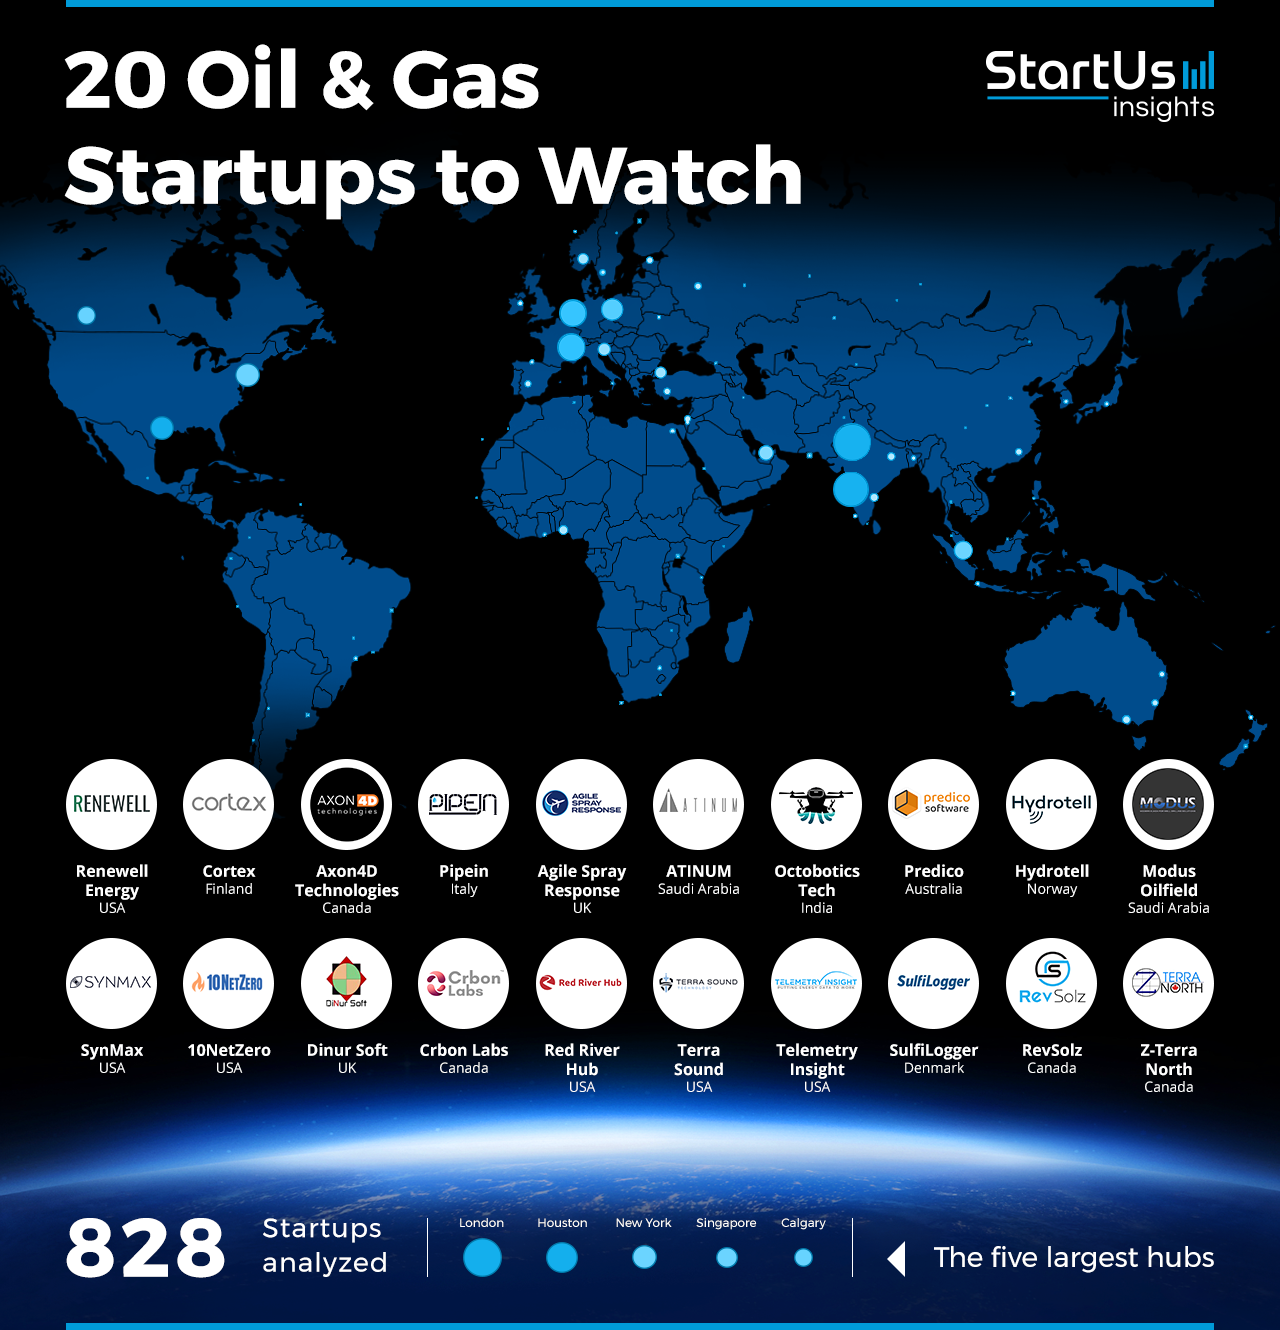 Oil & Gas Startups to Watch | StartUs Insights